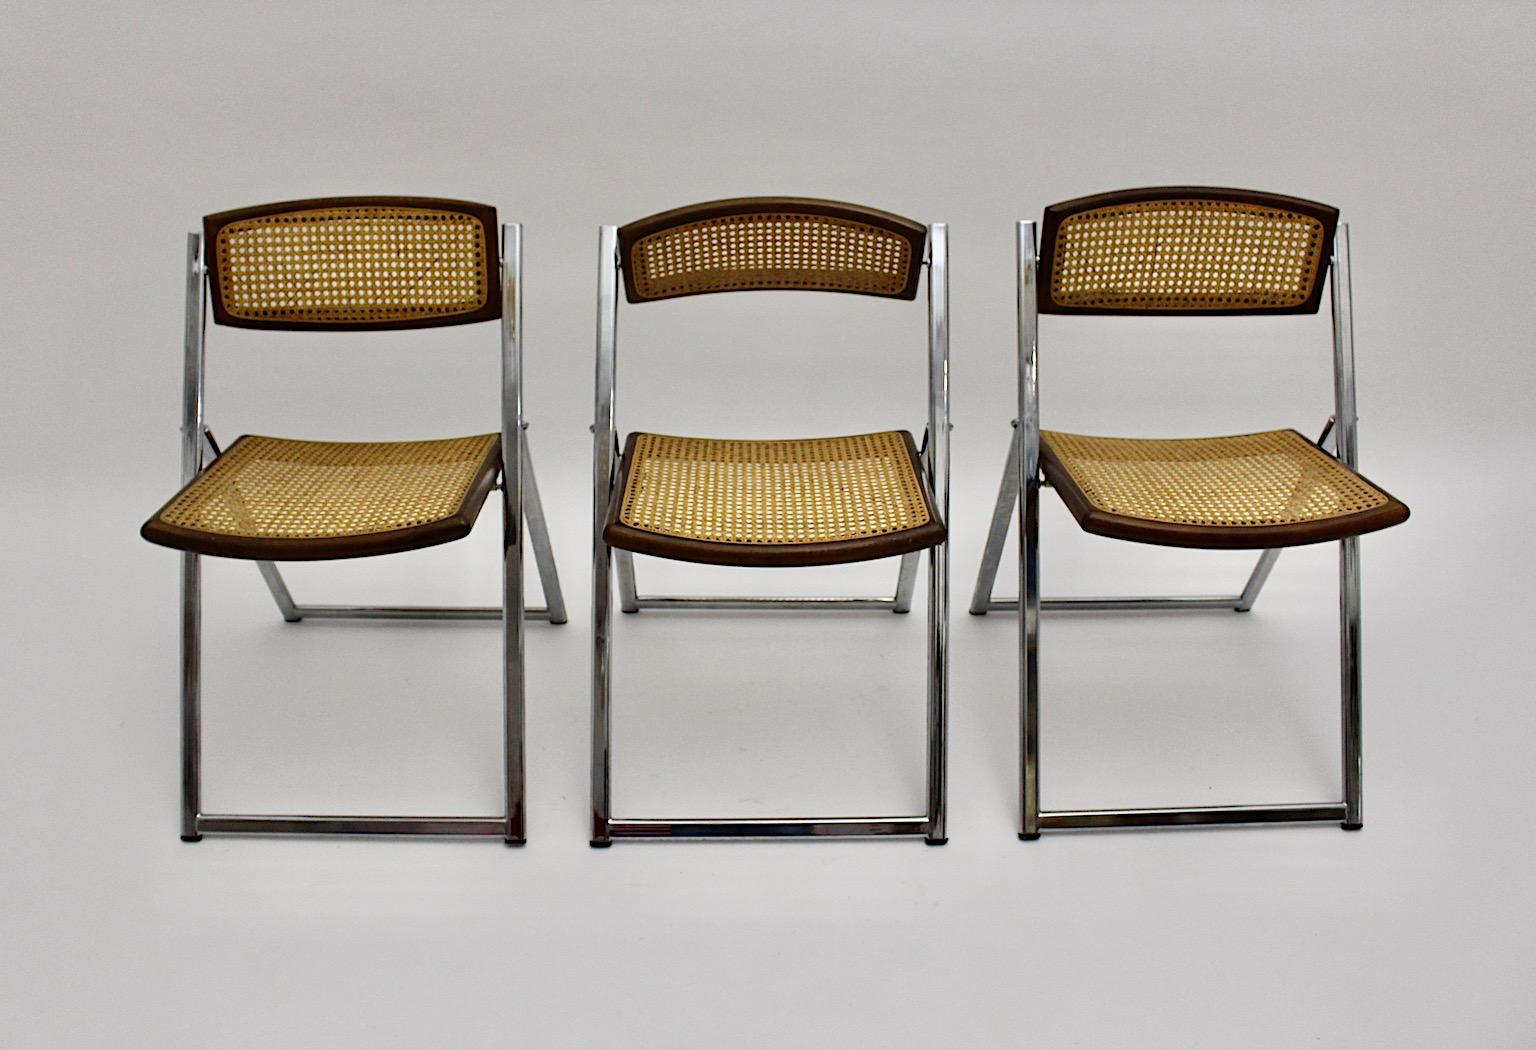 Modernist Organic Vintage Three Foldable Dining Chairs Beech Mesh Chrome, 1970s For Sale 1